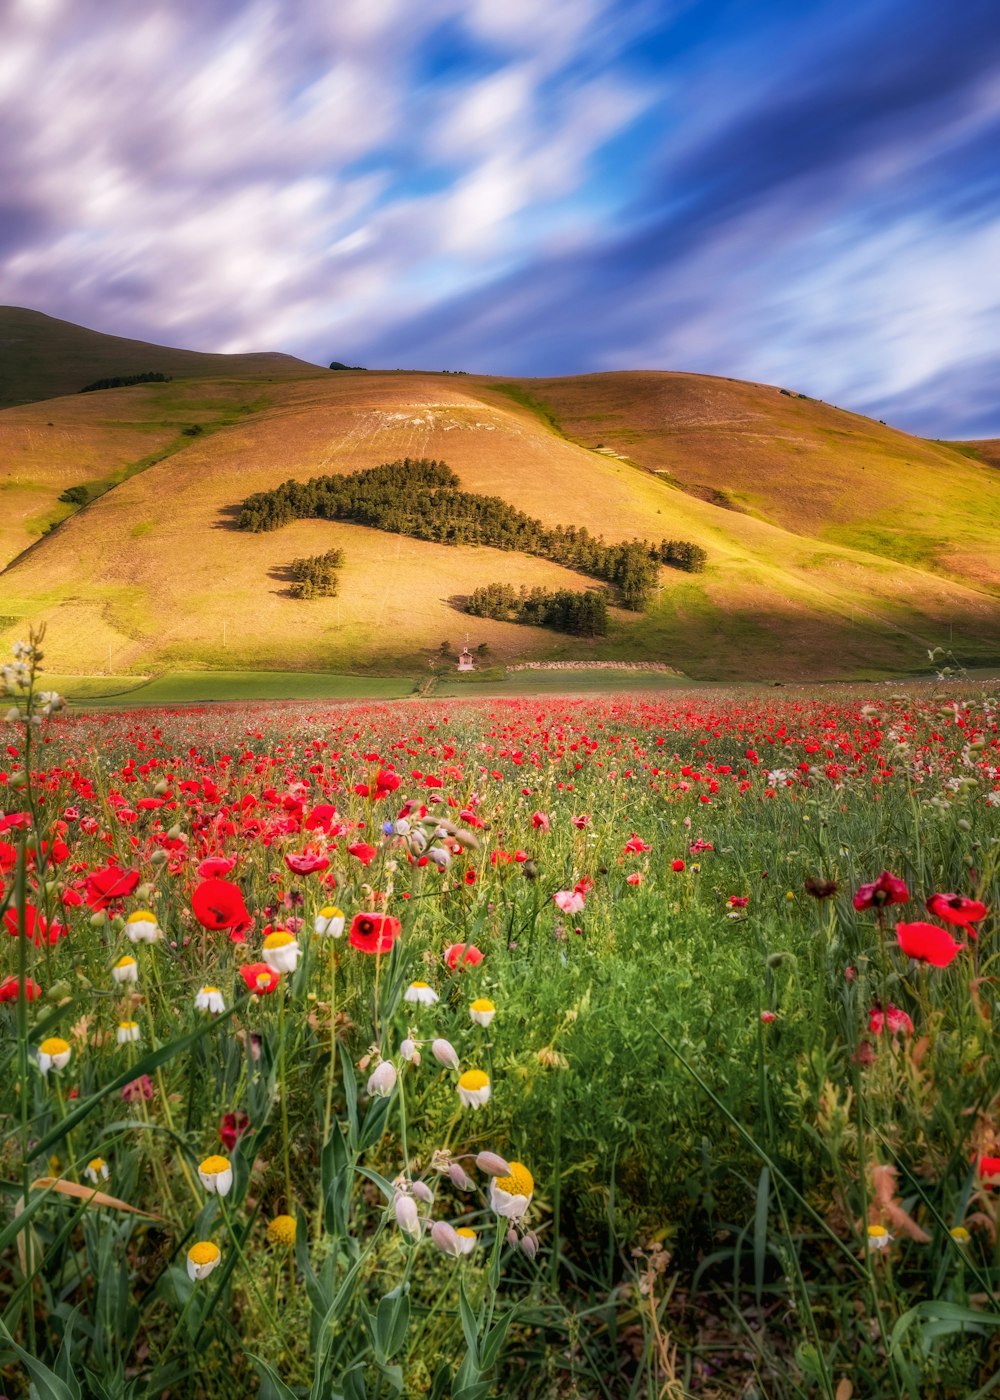 red and white flower field near mountain under blue sky during daytime